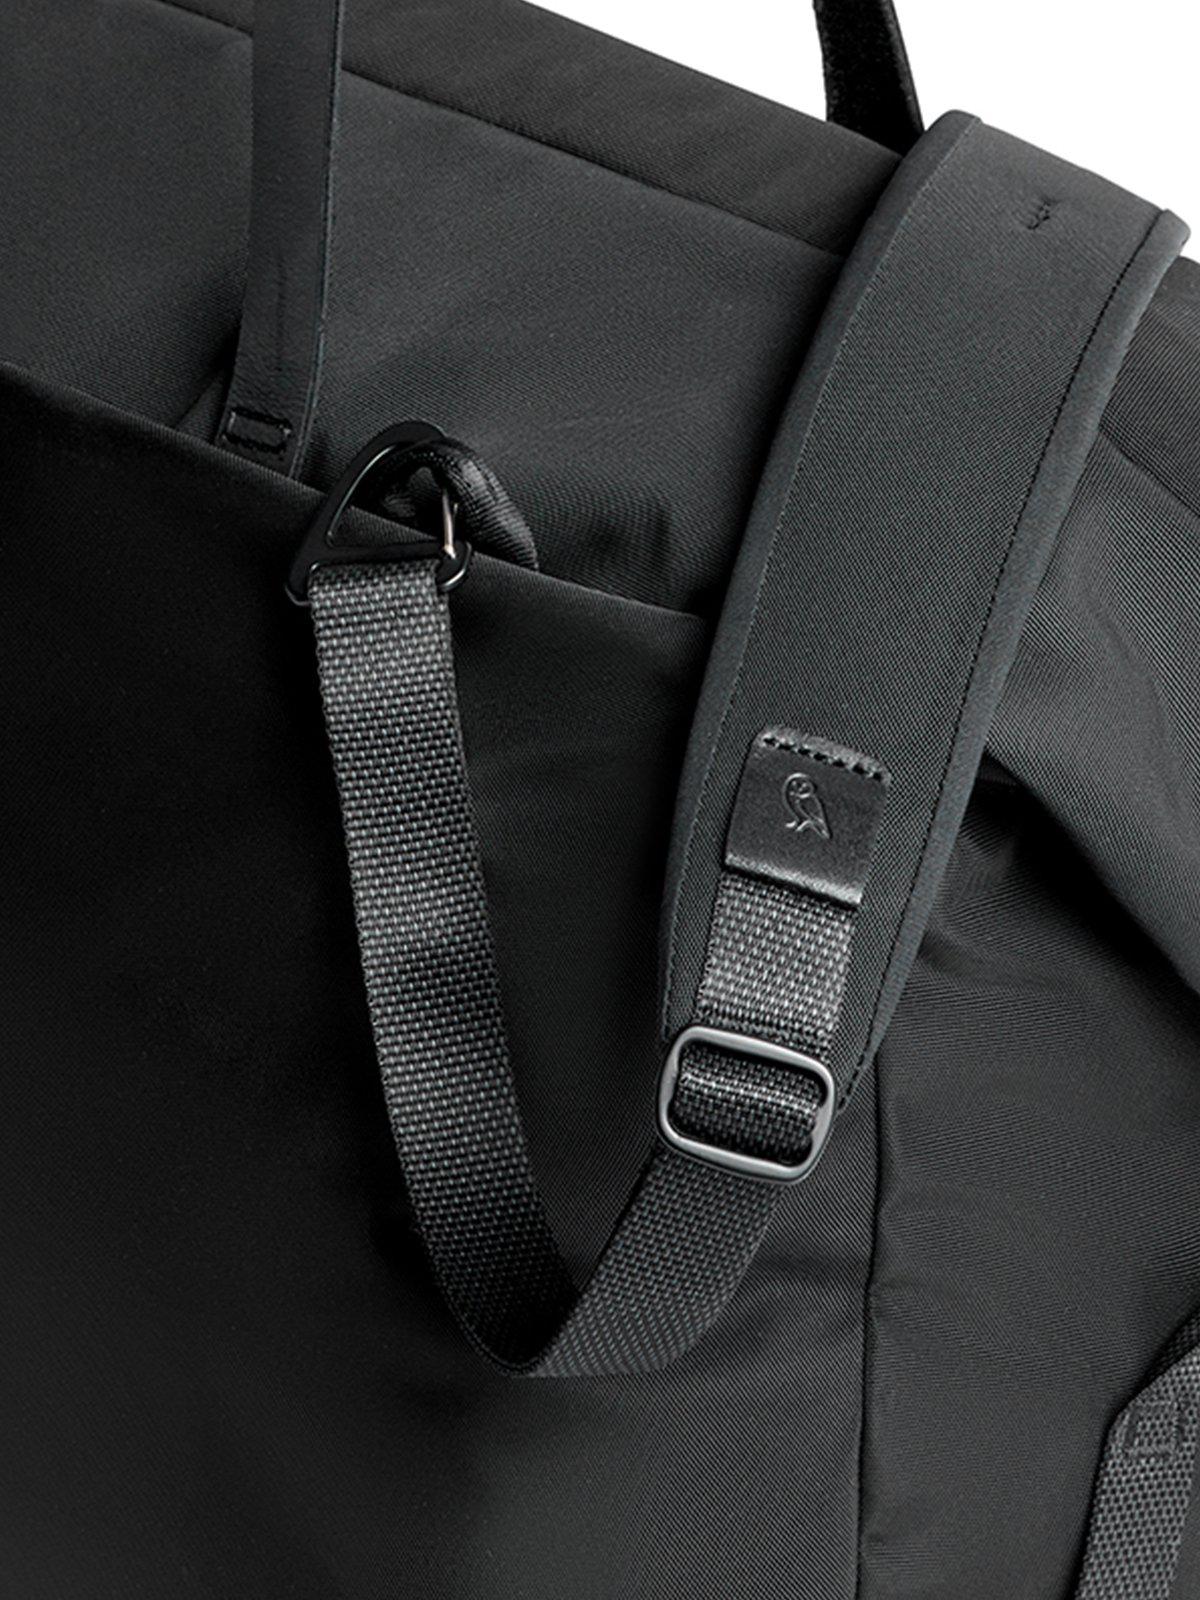 Bellroy Weekender Black 30L - MORE by Morello Indonesia